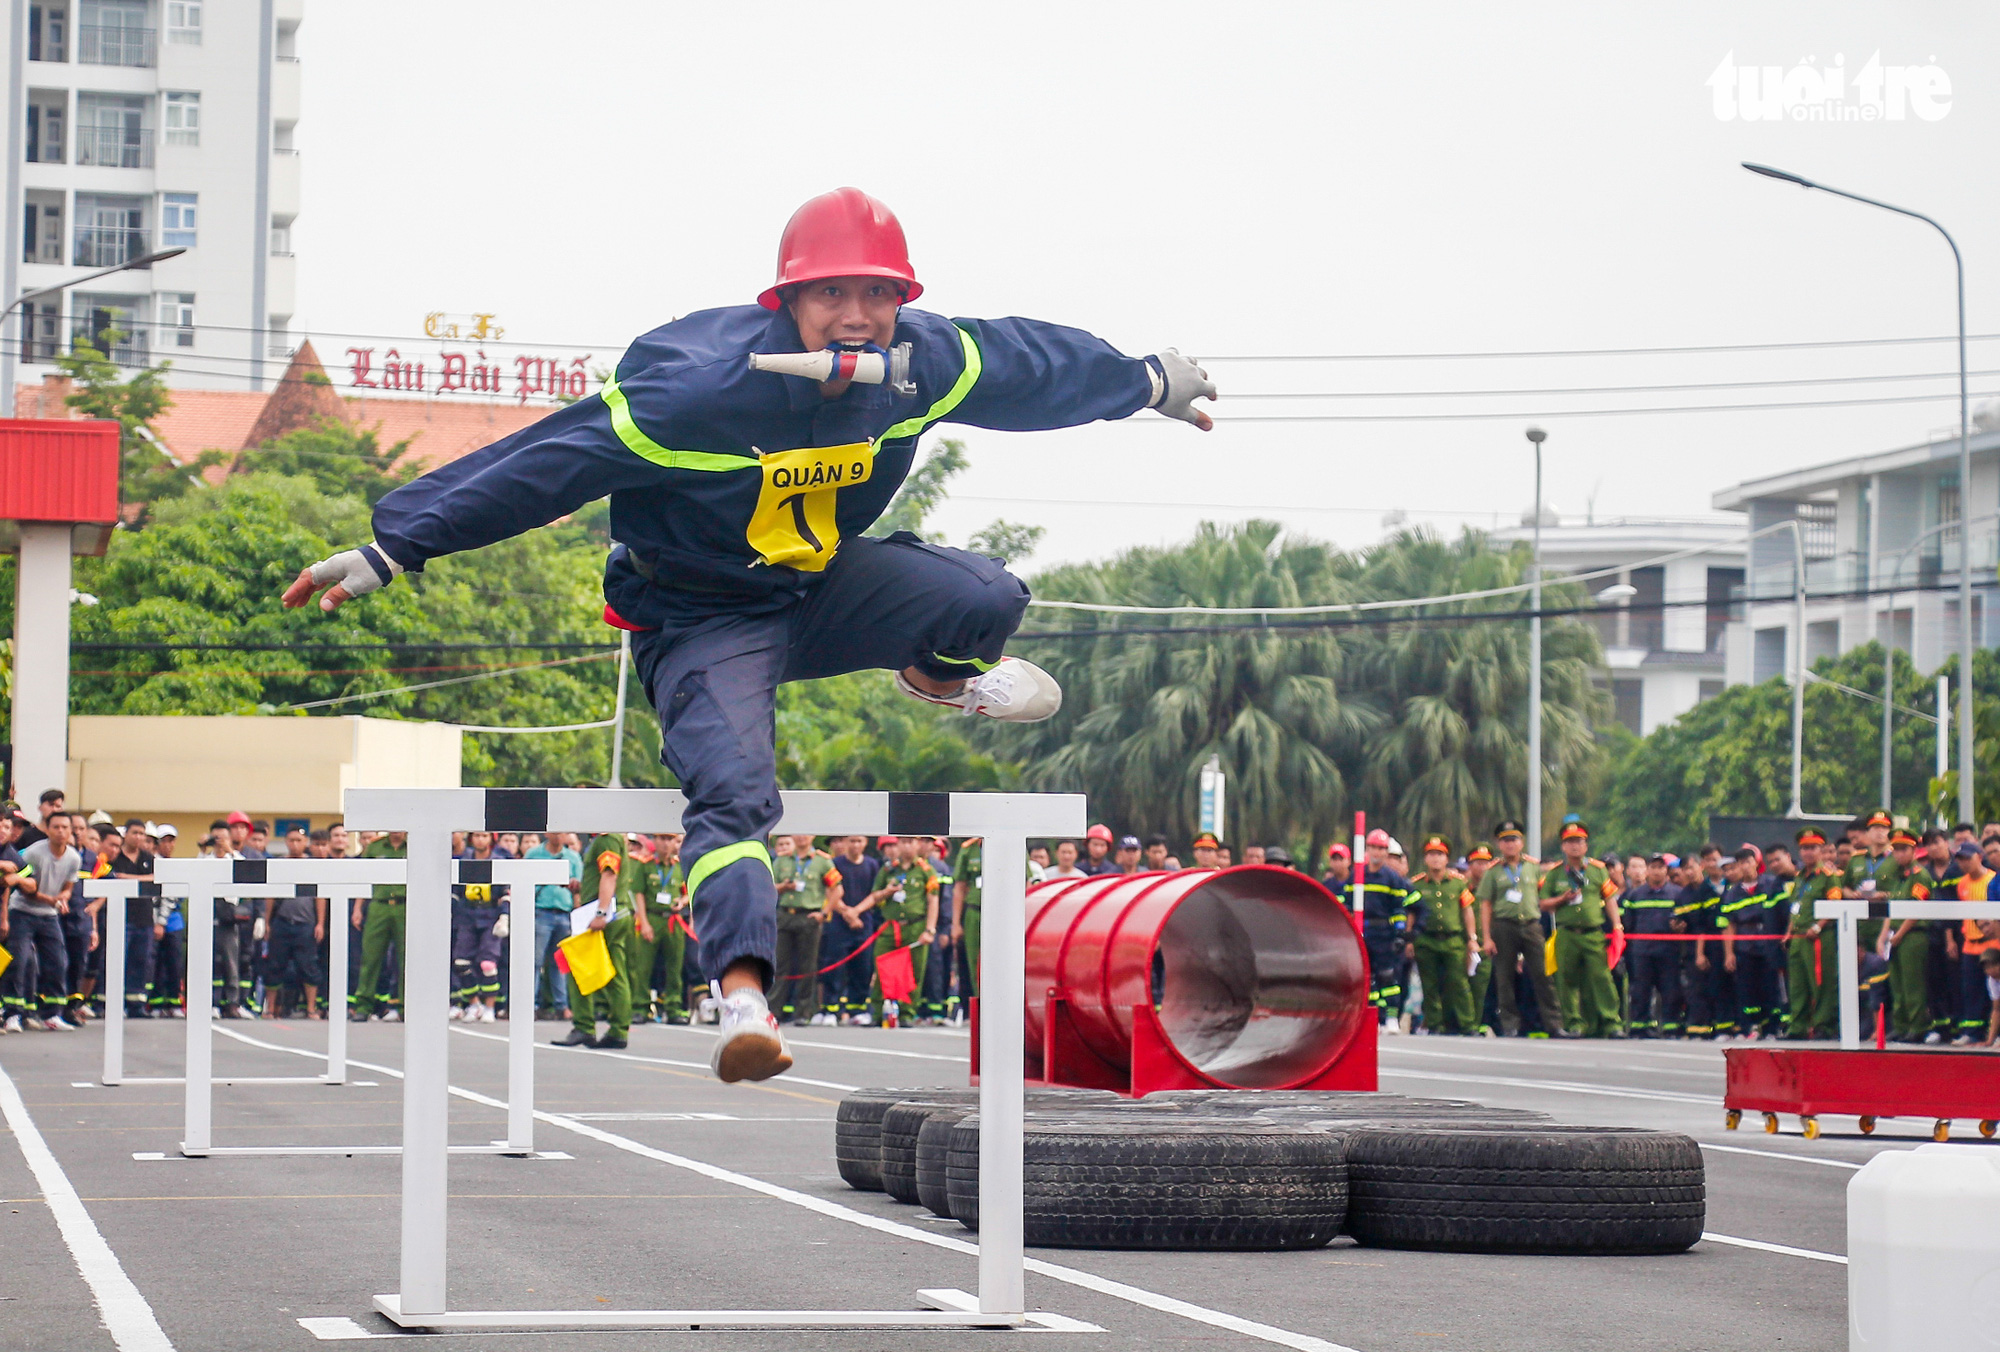 A firefighter participates in an obstacle race during a firefighting and rescue competition in Ho Chi Minh City, June 16, 2020. Photo: Chau Tuan / Tuoi Tre